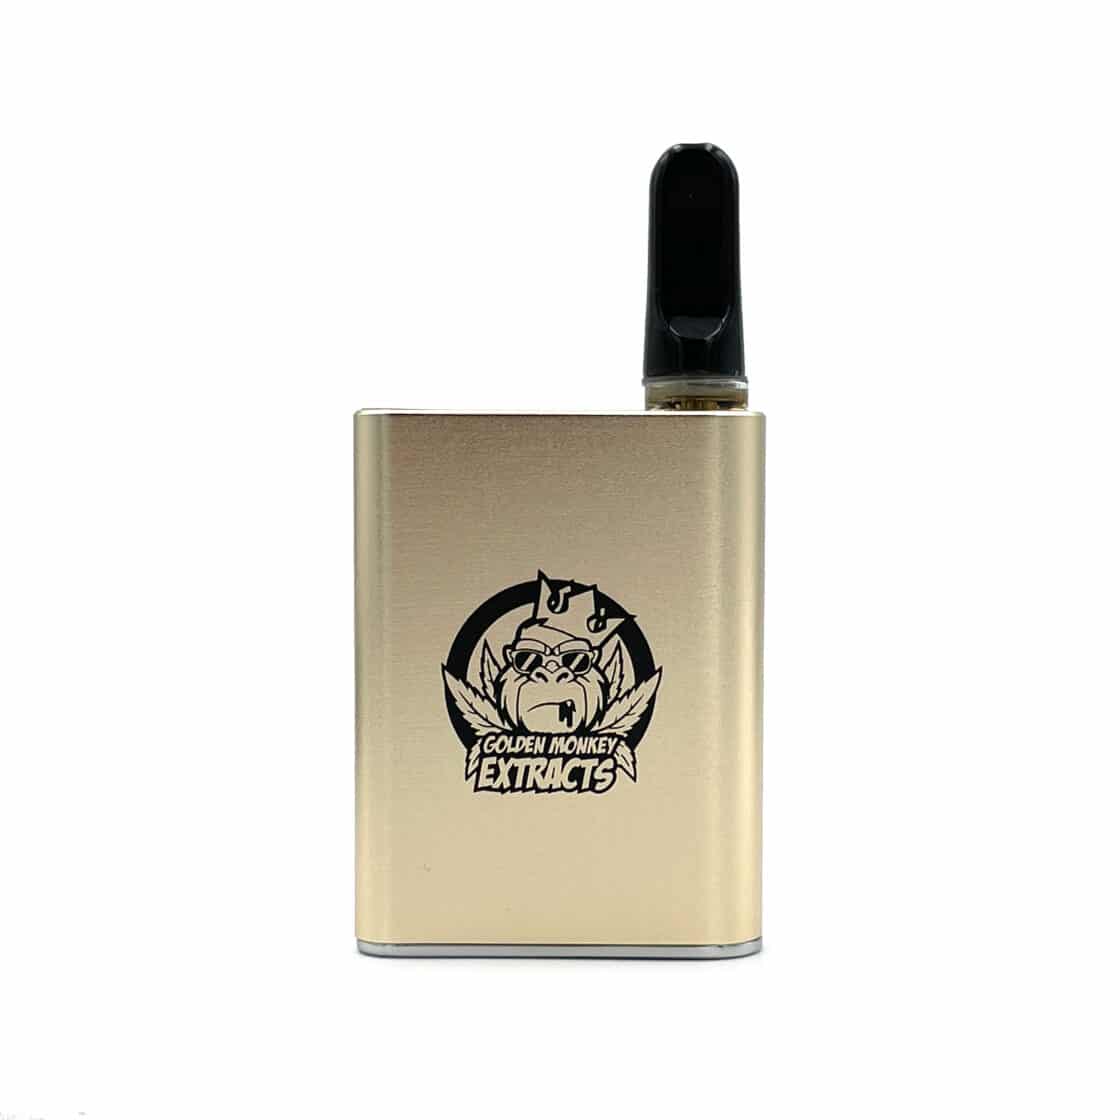 Golden Monkey Extracts – High-performance 510 Thread Gold Plated Palm Battery